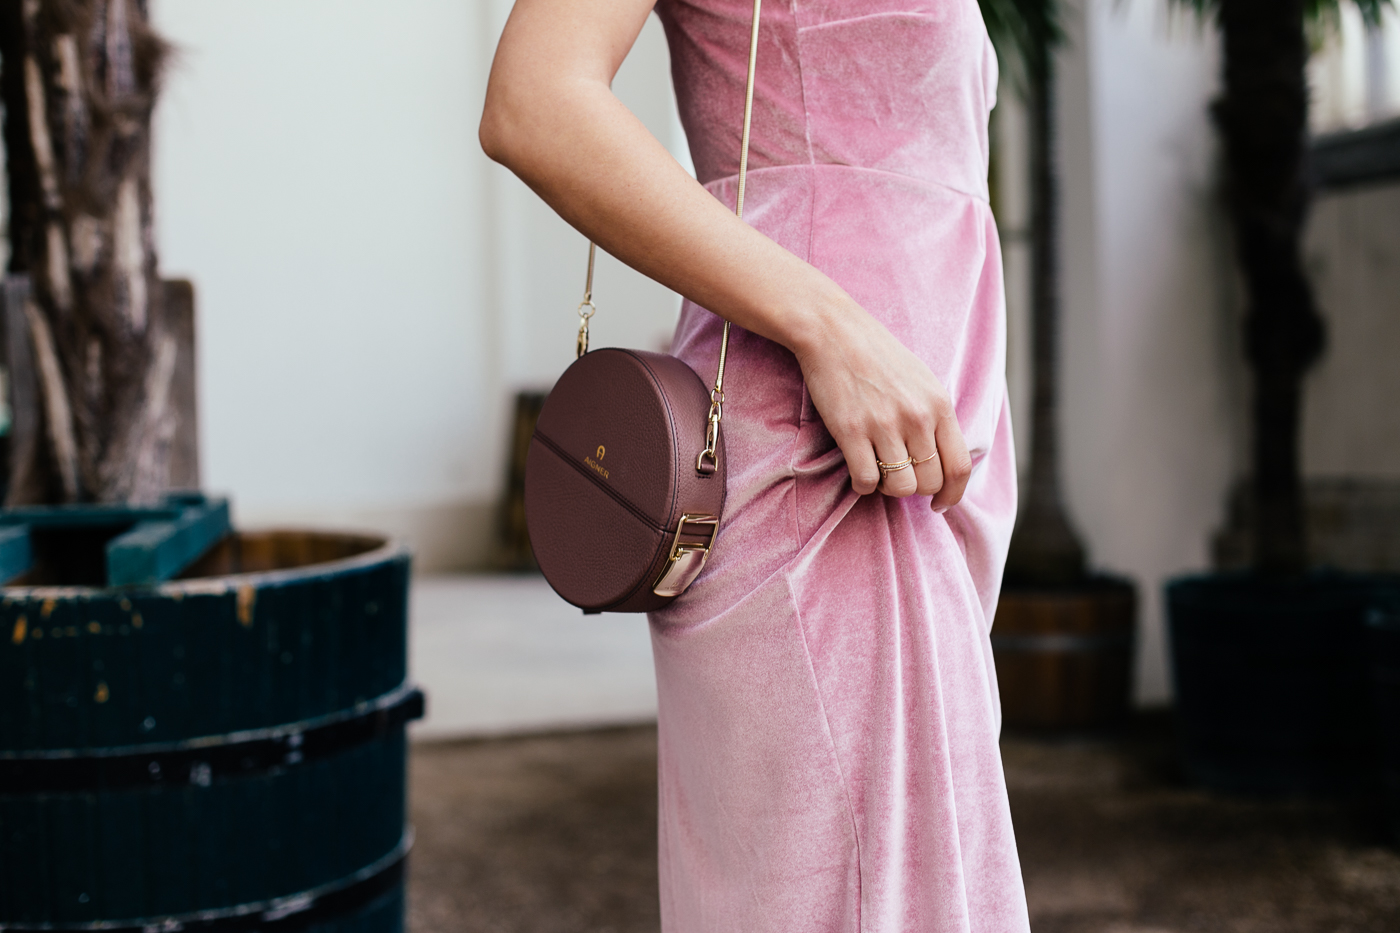 Hochzeitsgast Outfit - EDITED Wedding Guest | Love Daily Dose